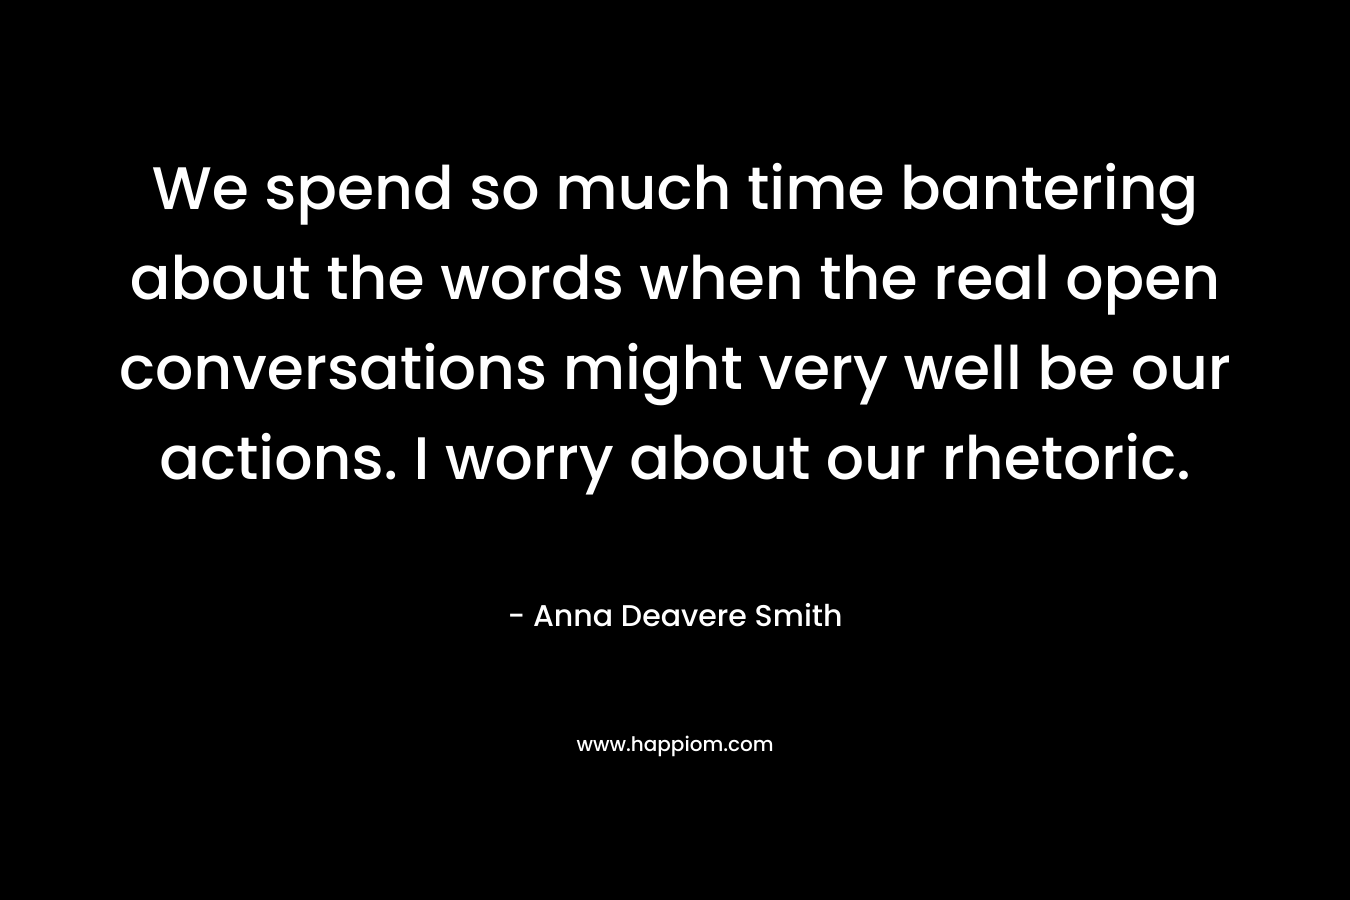 We spend so much time bantering about the words when the real open conversations might very well be our actions. I worry about our rhetoric. – Anna Deavere Smith